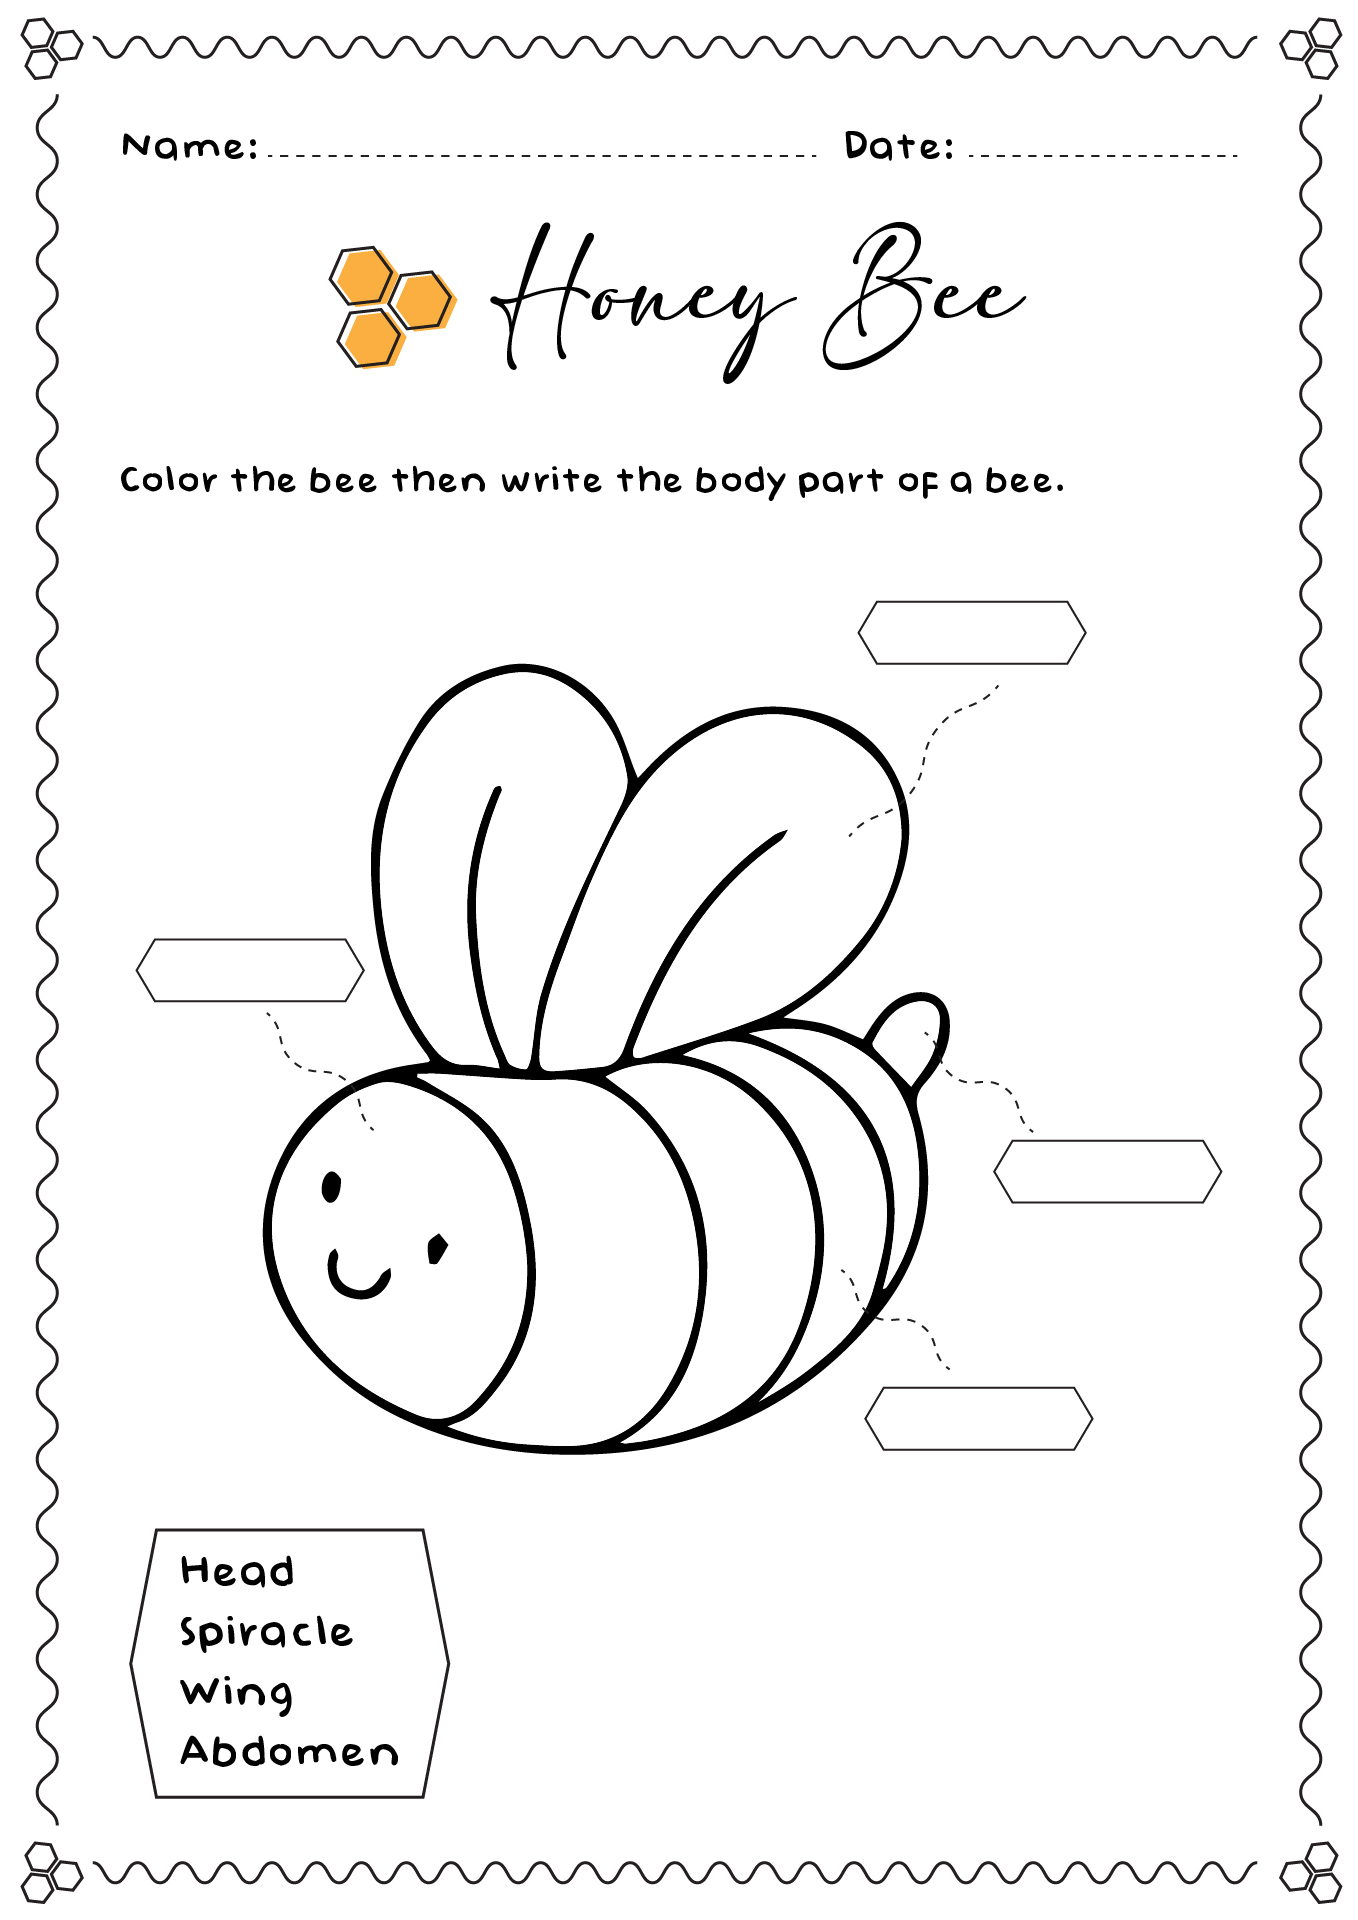 12 Best Images of Bee Worksheets For First Graders Honey Bee Activity